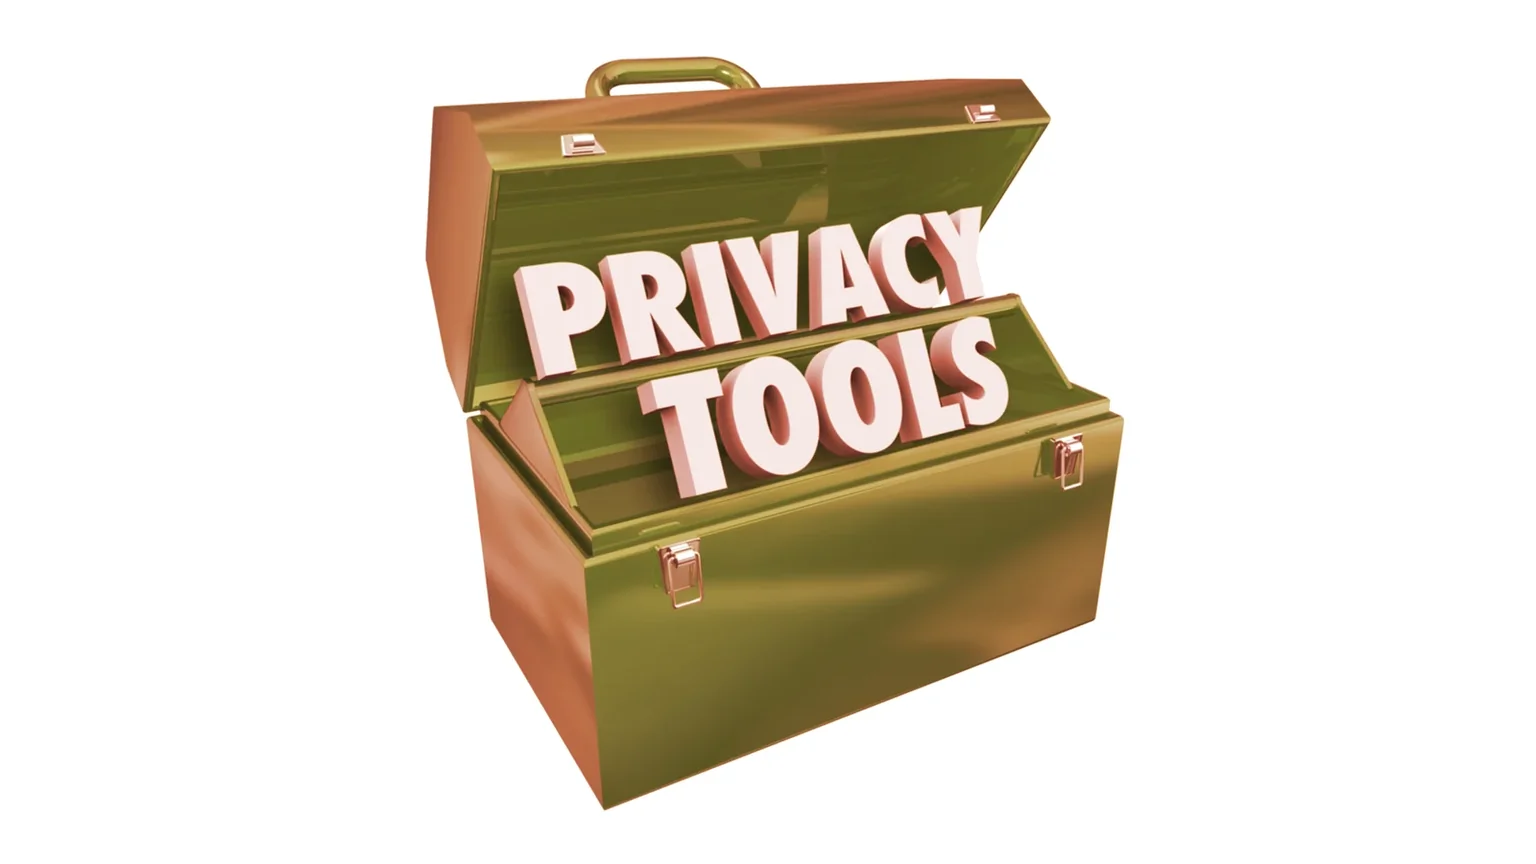 Here's your DeFi privacy toolbox.